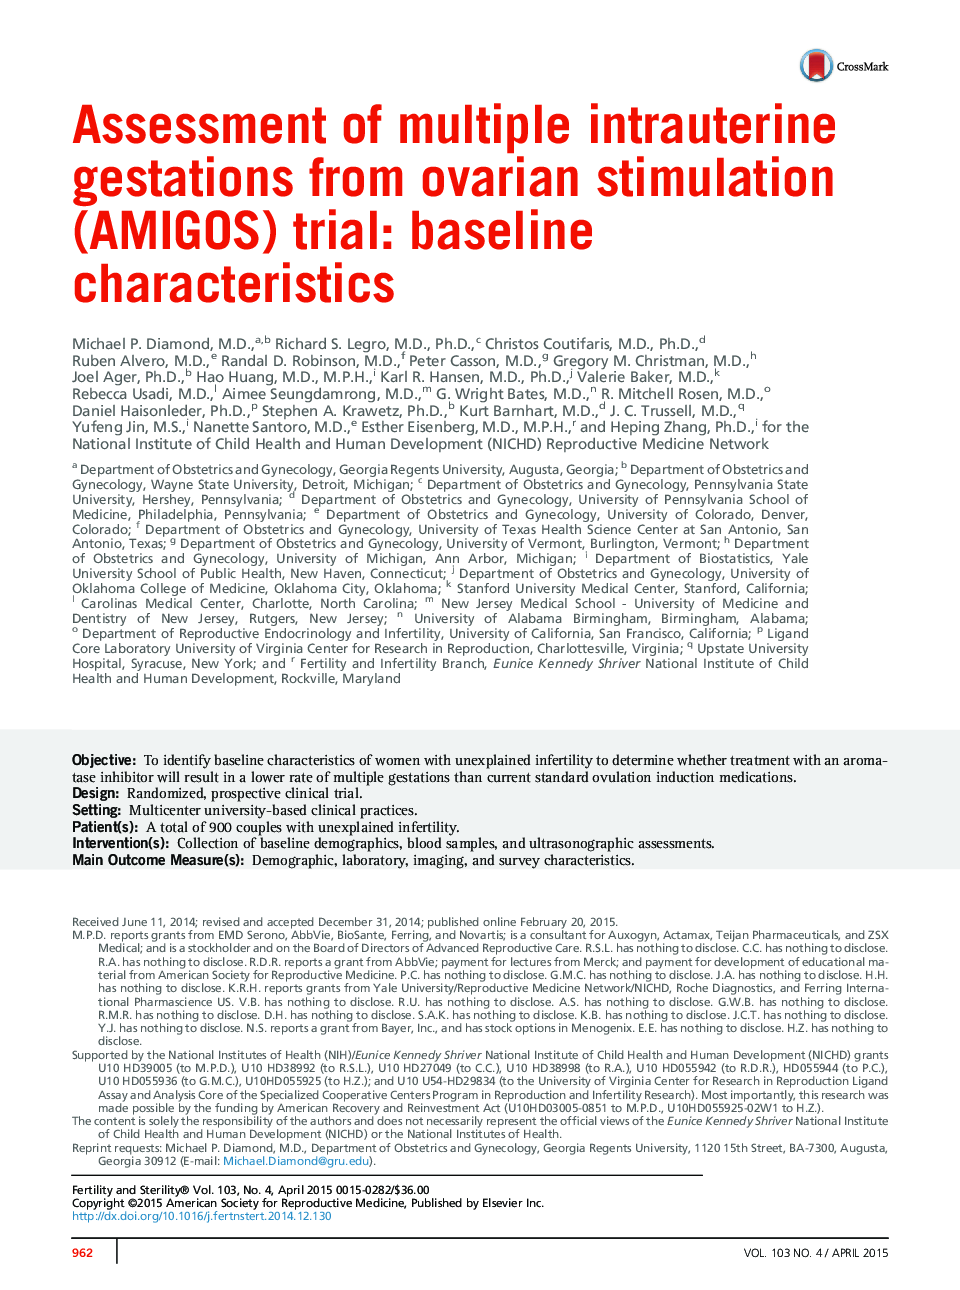 Assessment of multiple intrauterine gestations from ovarian stimulation (AMIGOS) trial: baseline characteristics